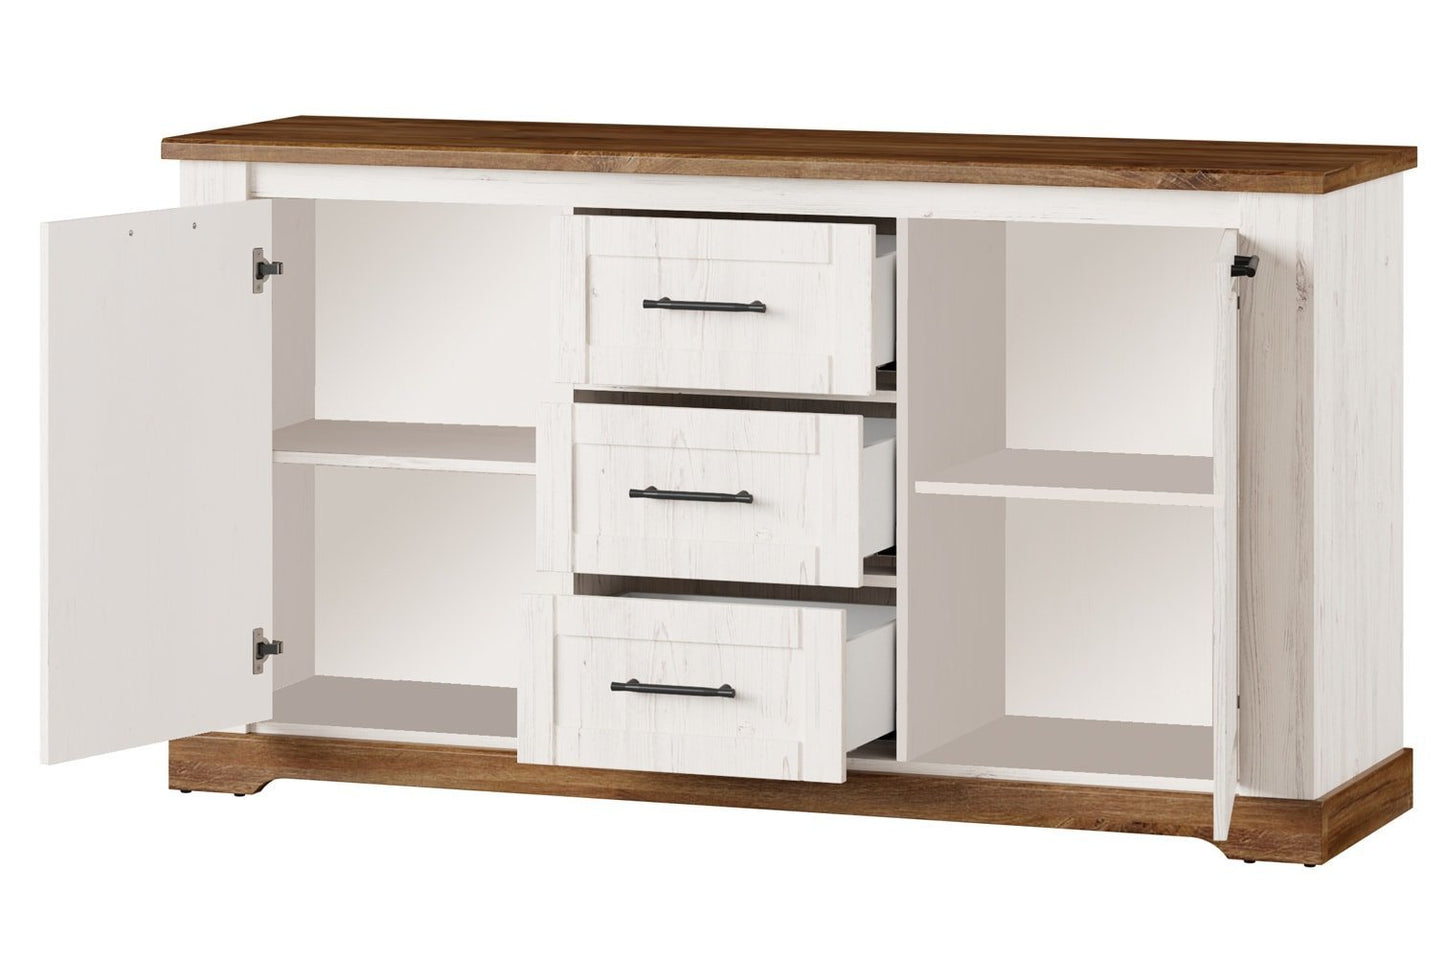 Country 45 Sideboard Cabinet 163cm